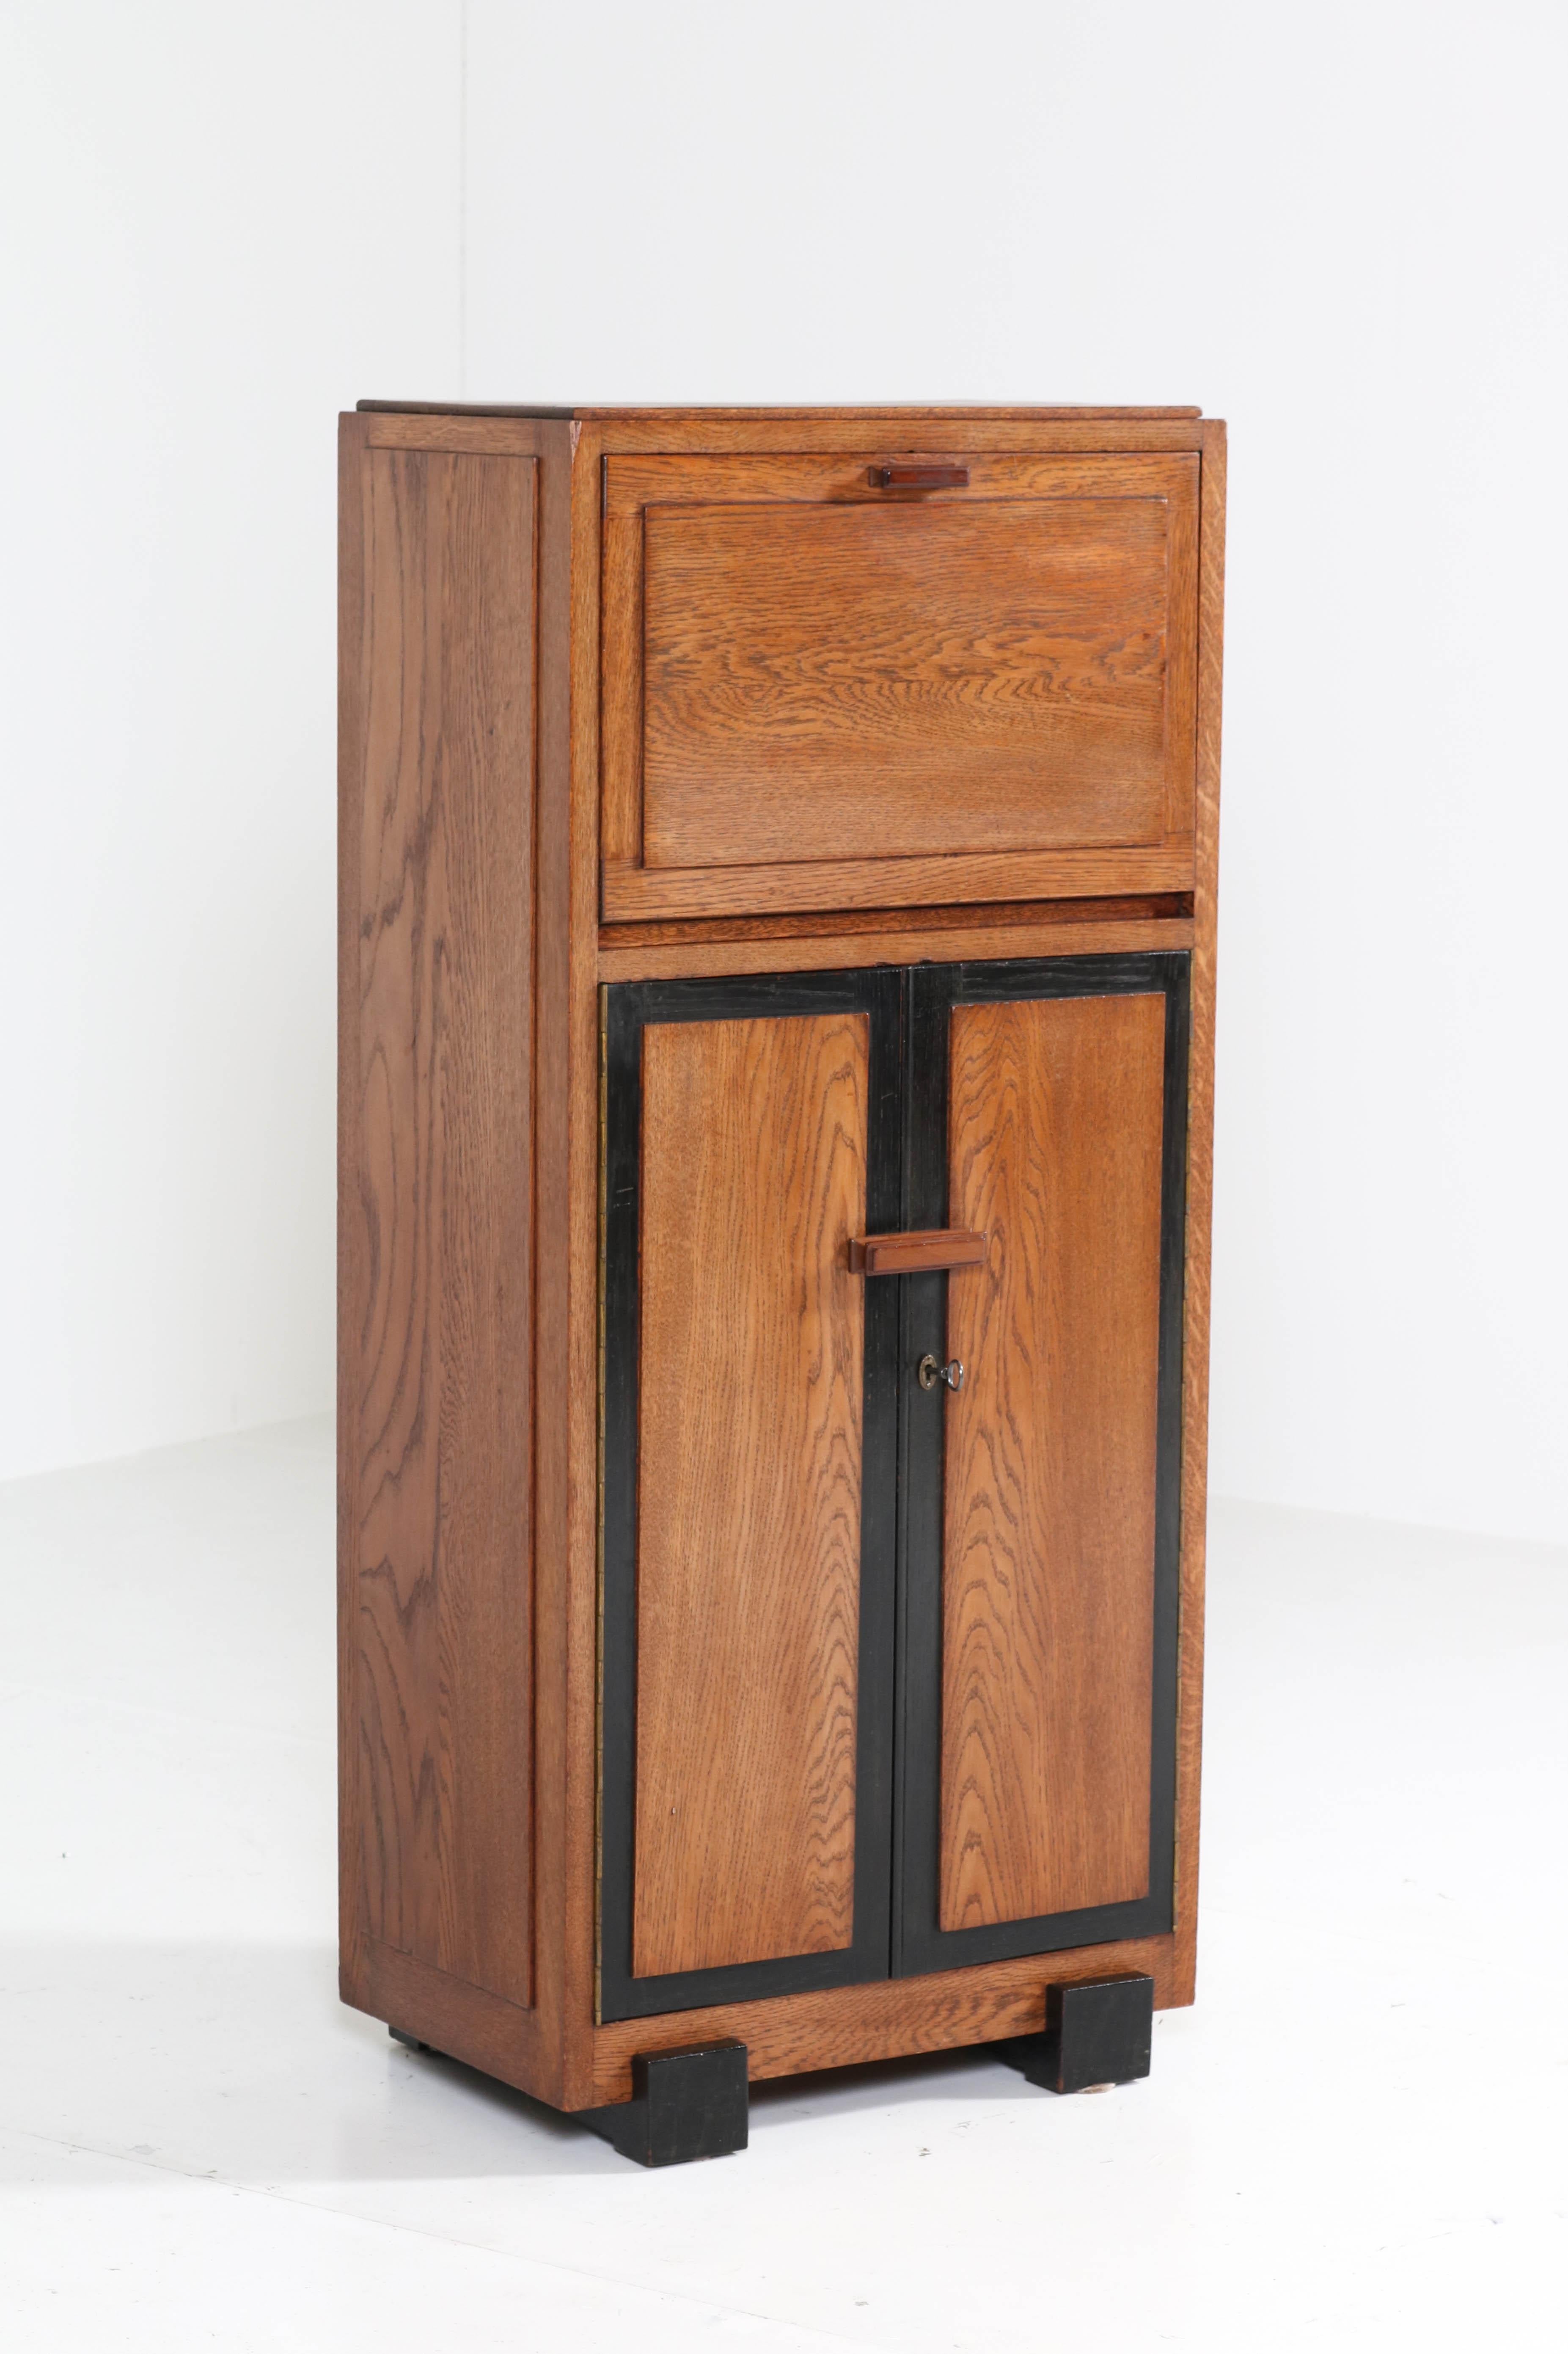 Wonderful Art Deco Haagse school cabinet or dry bar.
Striking Dutch design from the twenties.
Solid oak and original oak veneer with original black lacquered feet and lining.
The original use for this cabinet was for radio, a built in radio, but